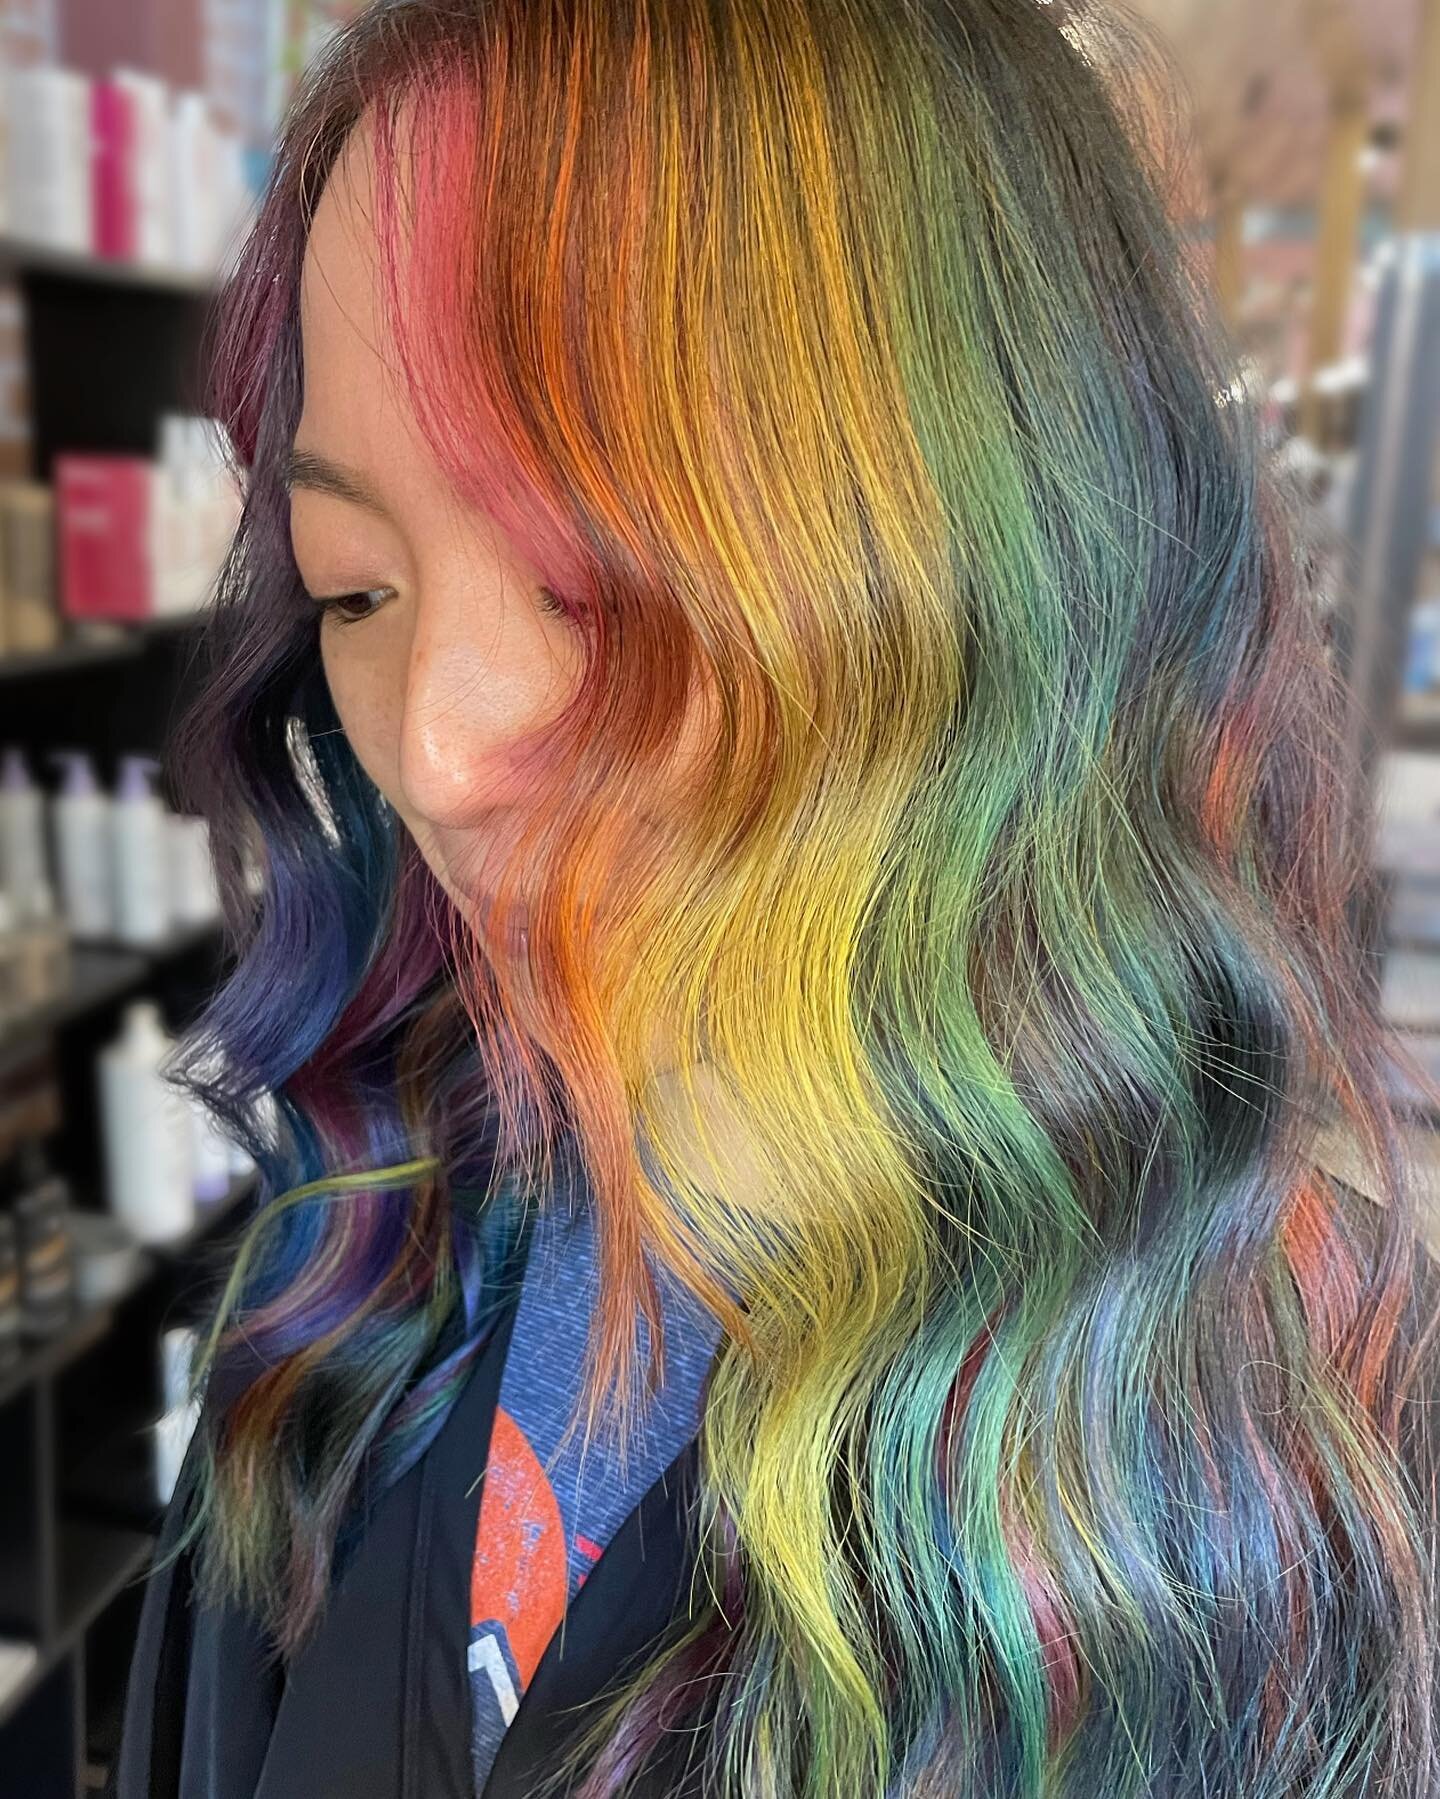 Happy June 🌈 Starting off strong with some rainbow hair for the second best month of the year 🏳️&zwj;🌈 (first best is october i dont make the rules)